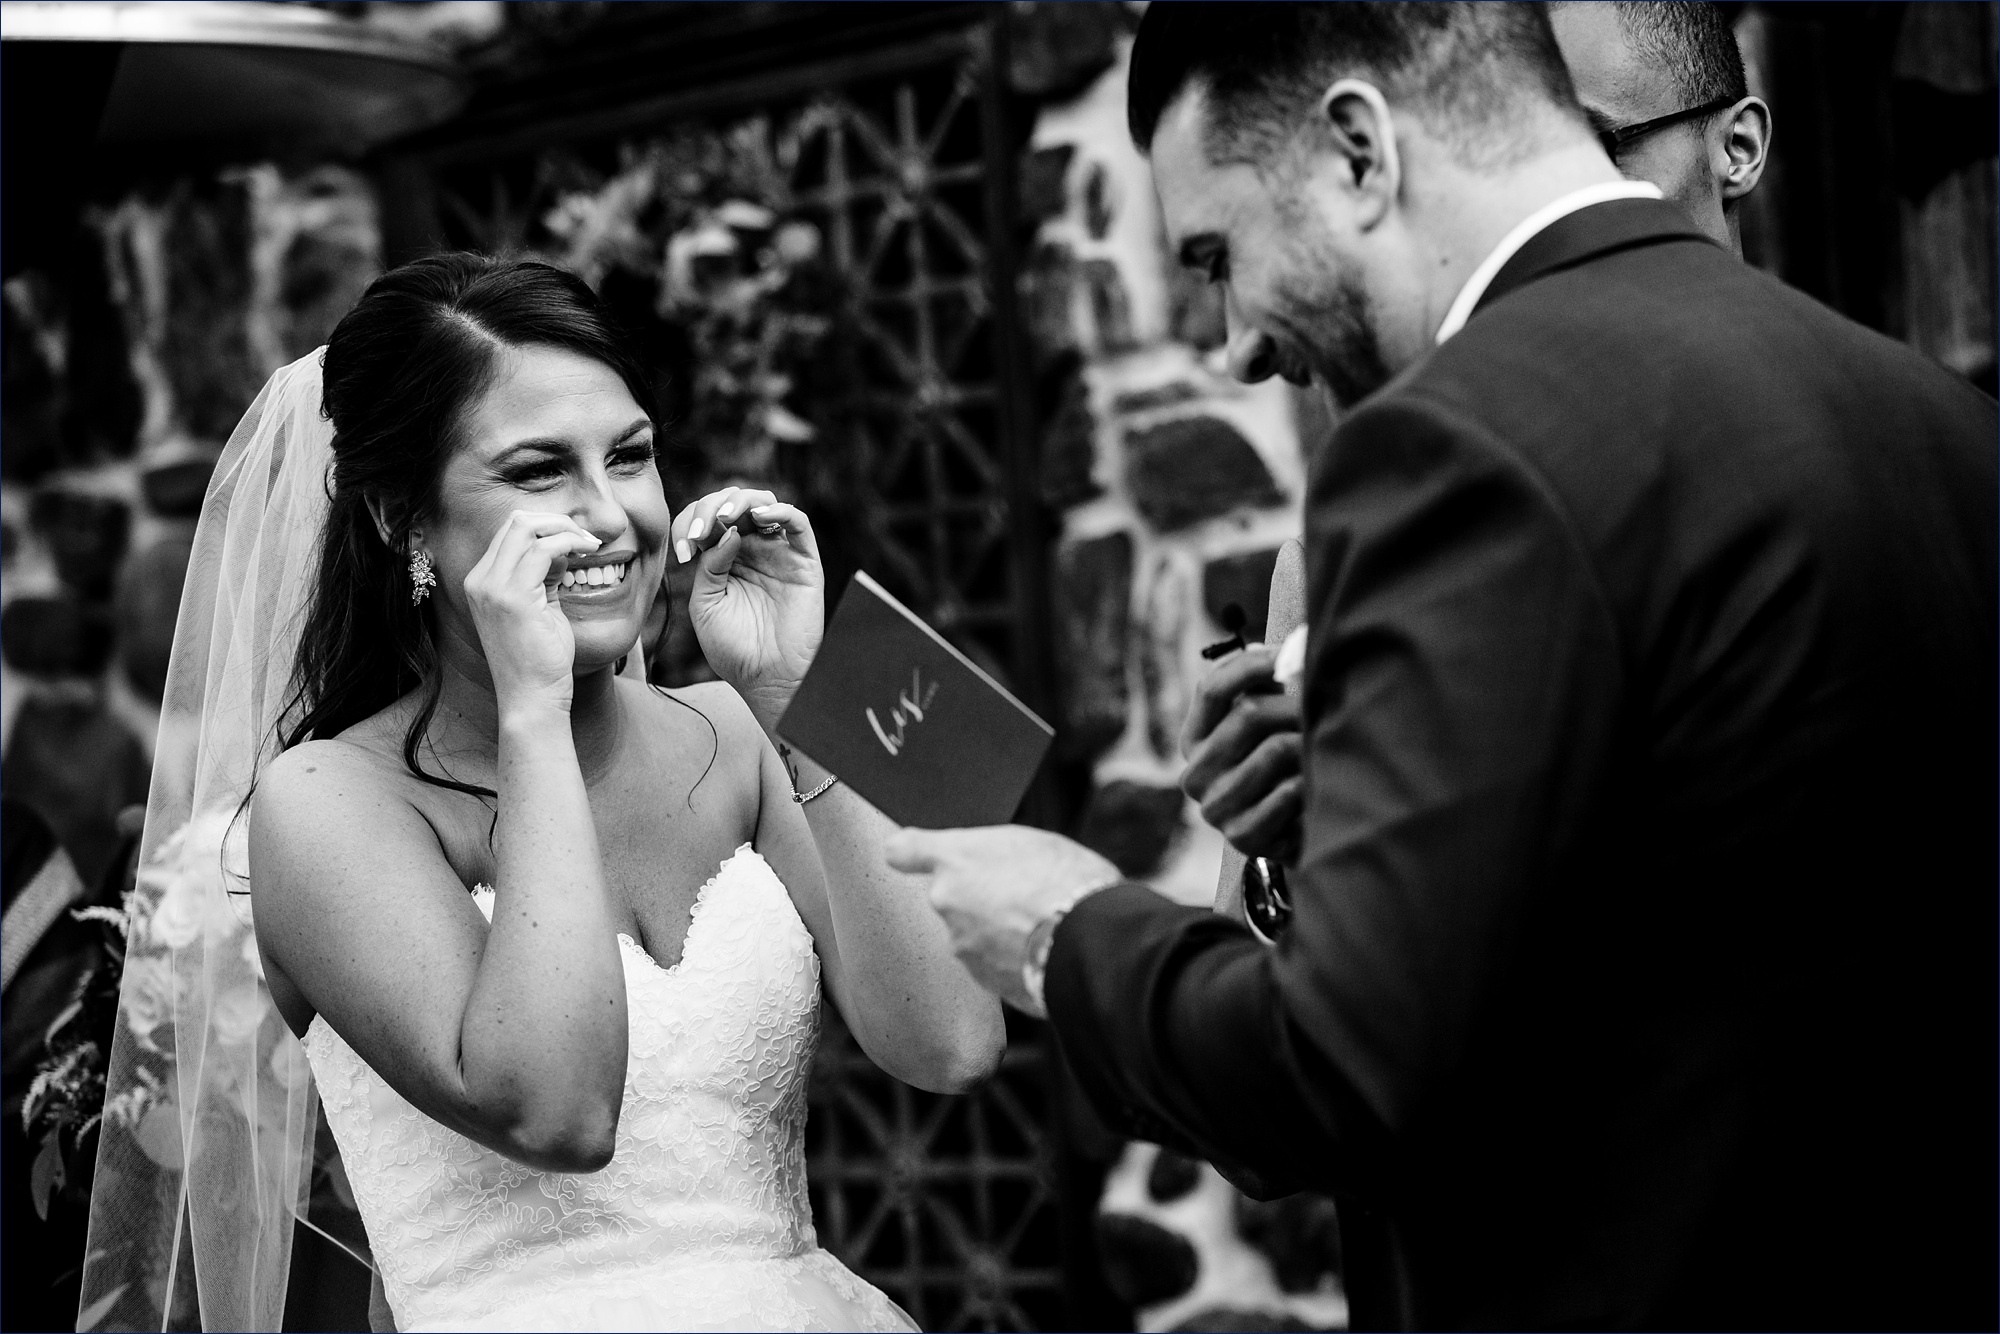 Bride laughs during the groom's vows to her on the wedding day